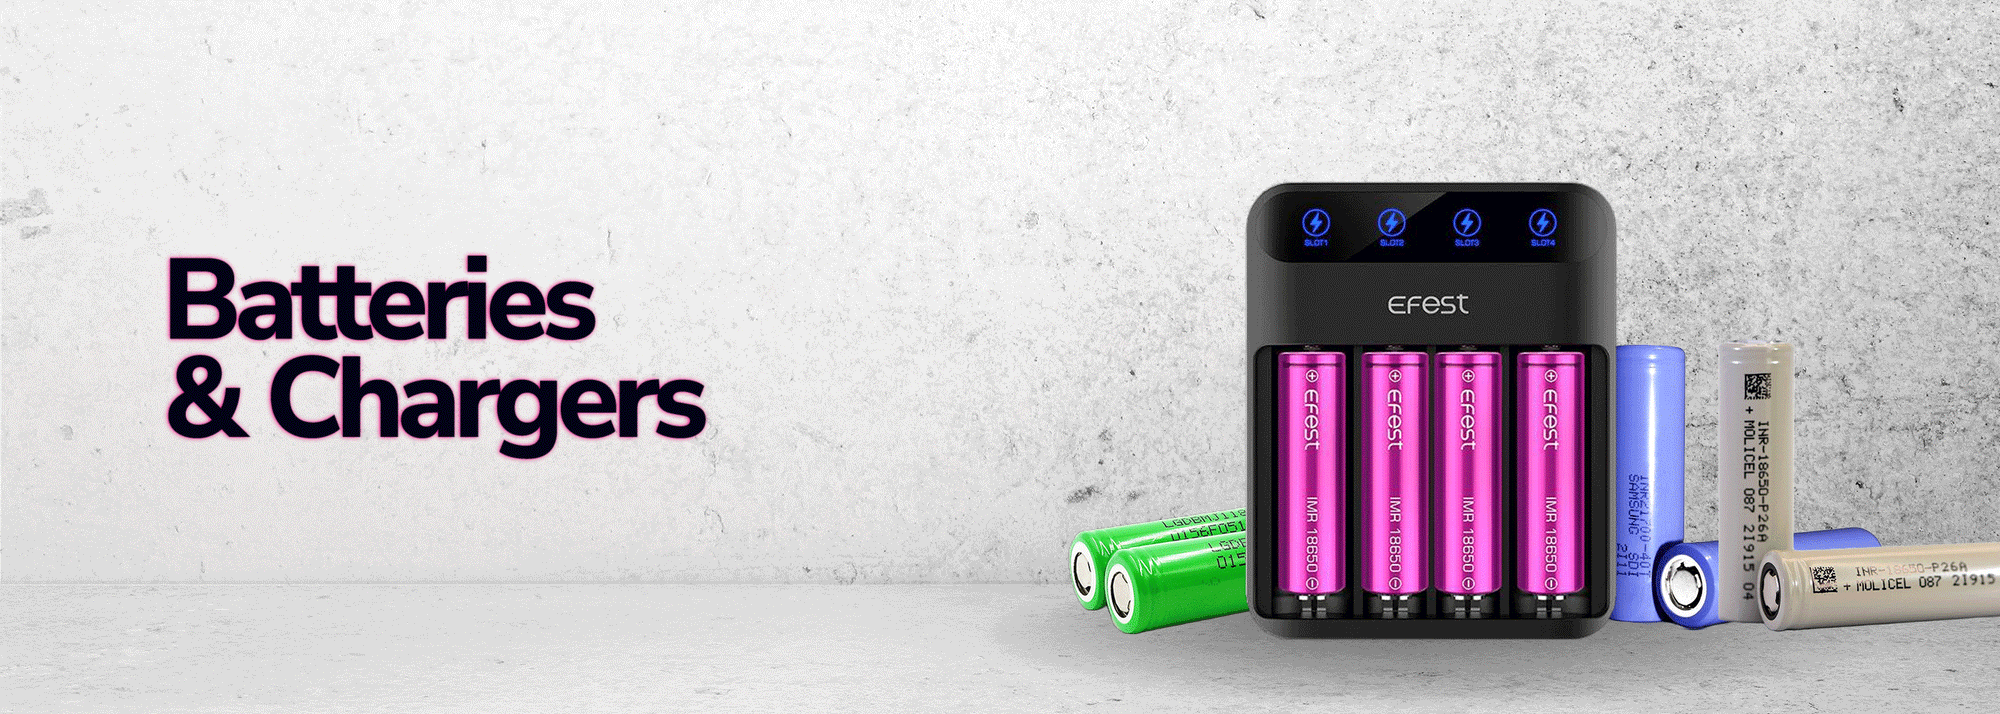 Where to Buy Vape Batteries and Chargers Melbourne - Wick and Wire Co Melbourne Vape Shop, Victoria Australia